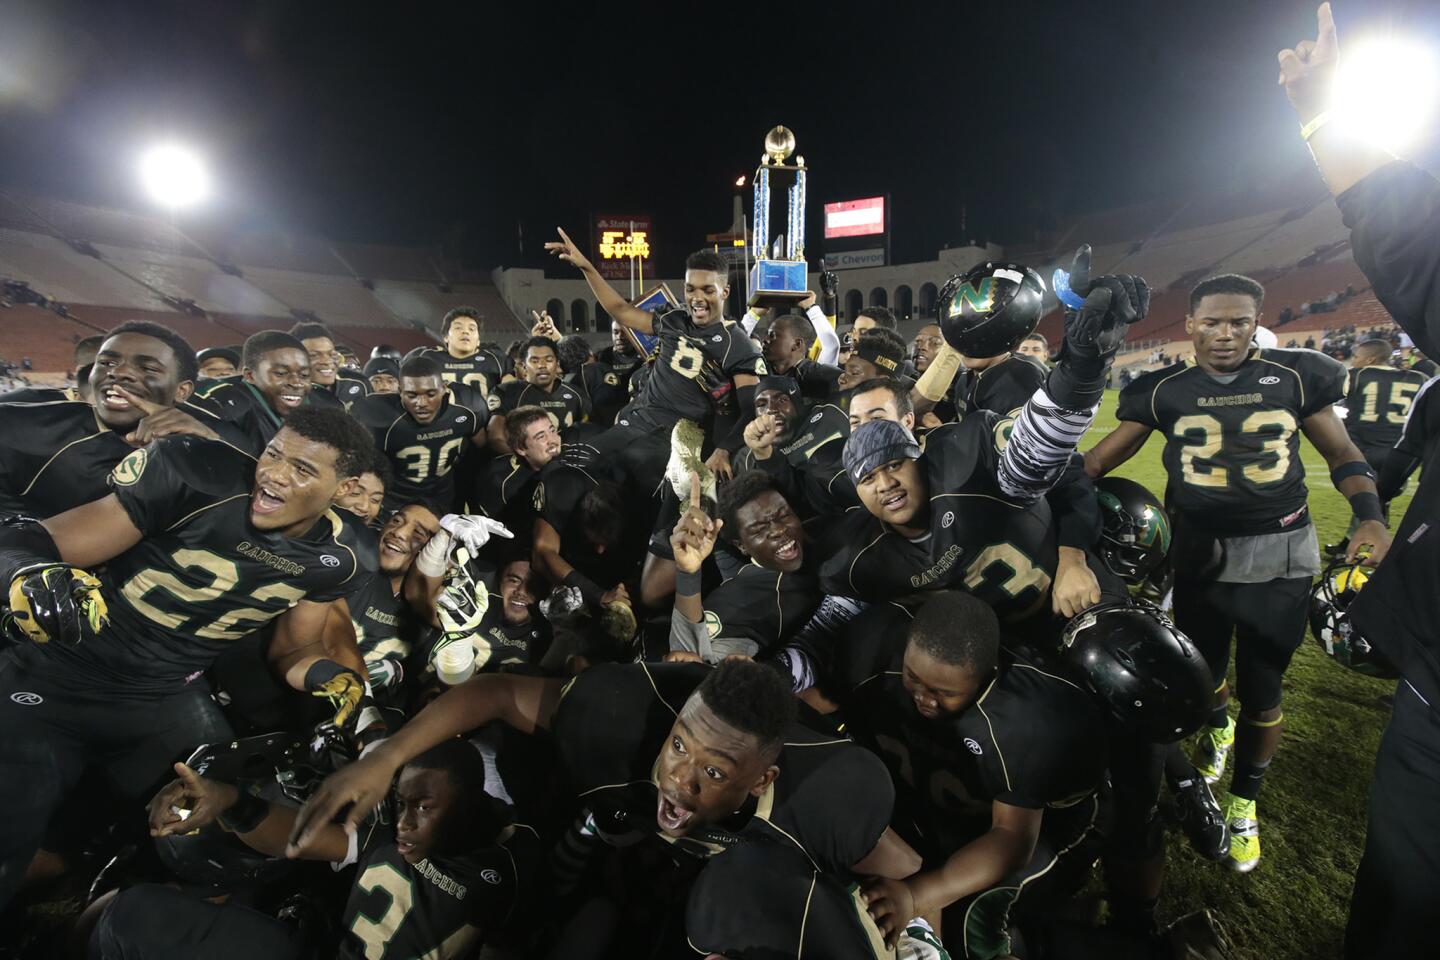 Narbonne players pile onto each other as they take a team picture following their 33-20 victory over Carson in the City Seciton Division I championship game on Saturday night at the Coliseum.